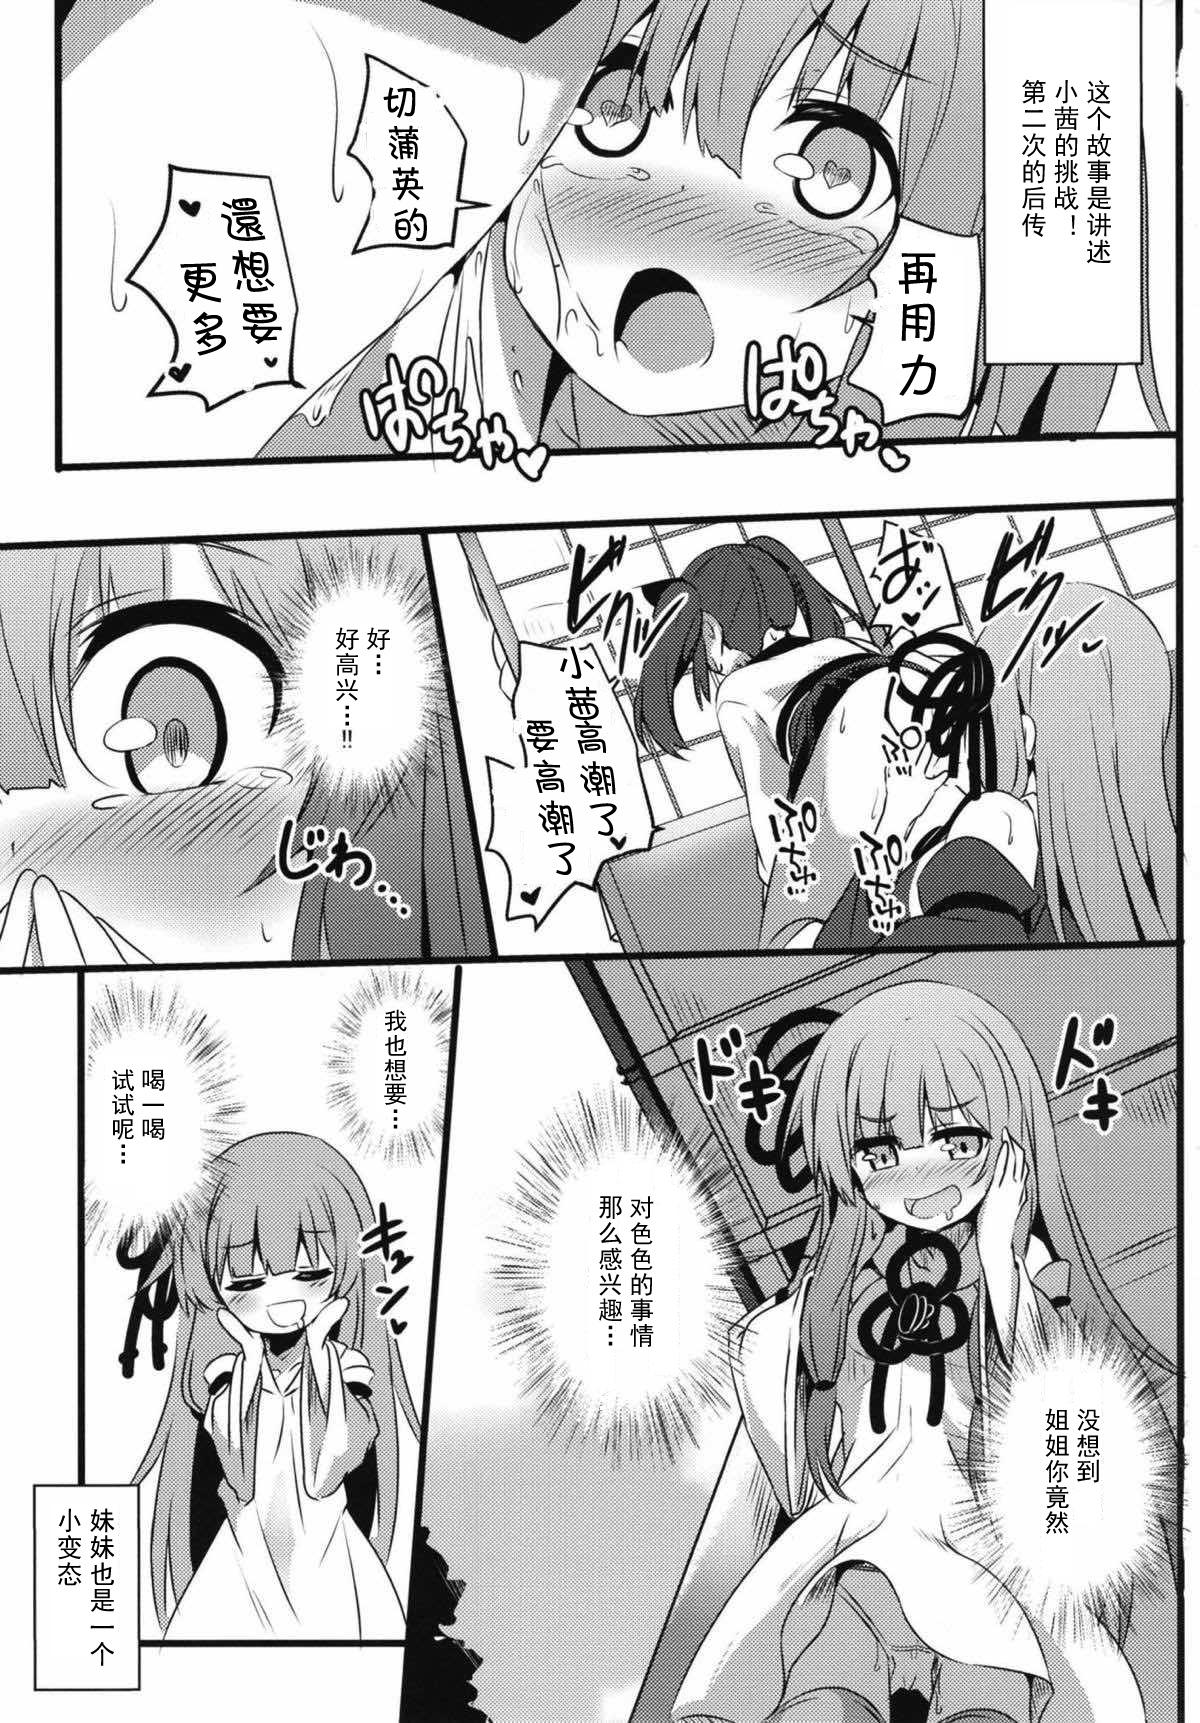 Bj (Kotonoha's Festa 2) [Milk Pudding (Jamcy)] Akane-chan Challenge! 2.5-kaime (VOICEROID) [Chinese] [古早个人汉化] - Voiceroid Freaky - Page 3